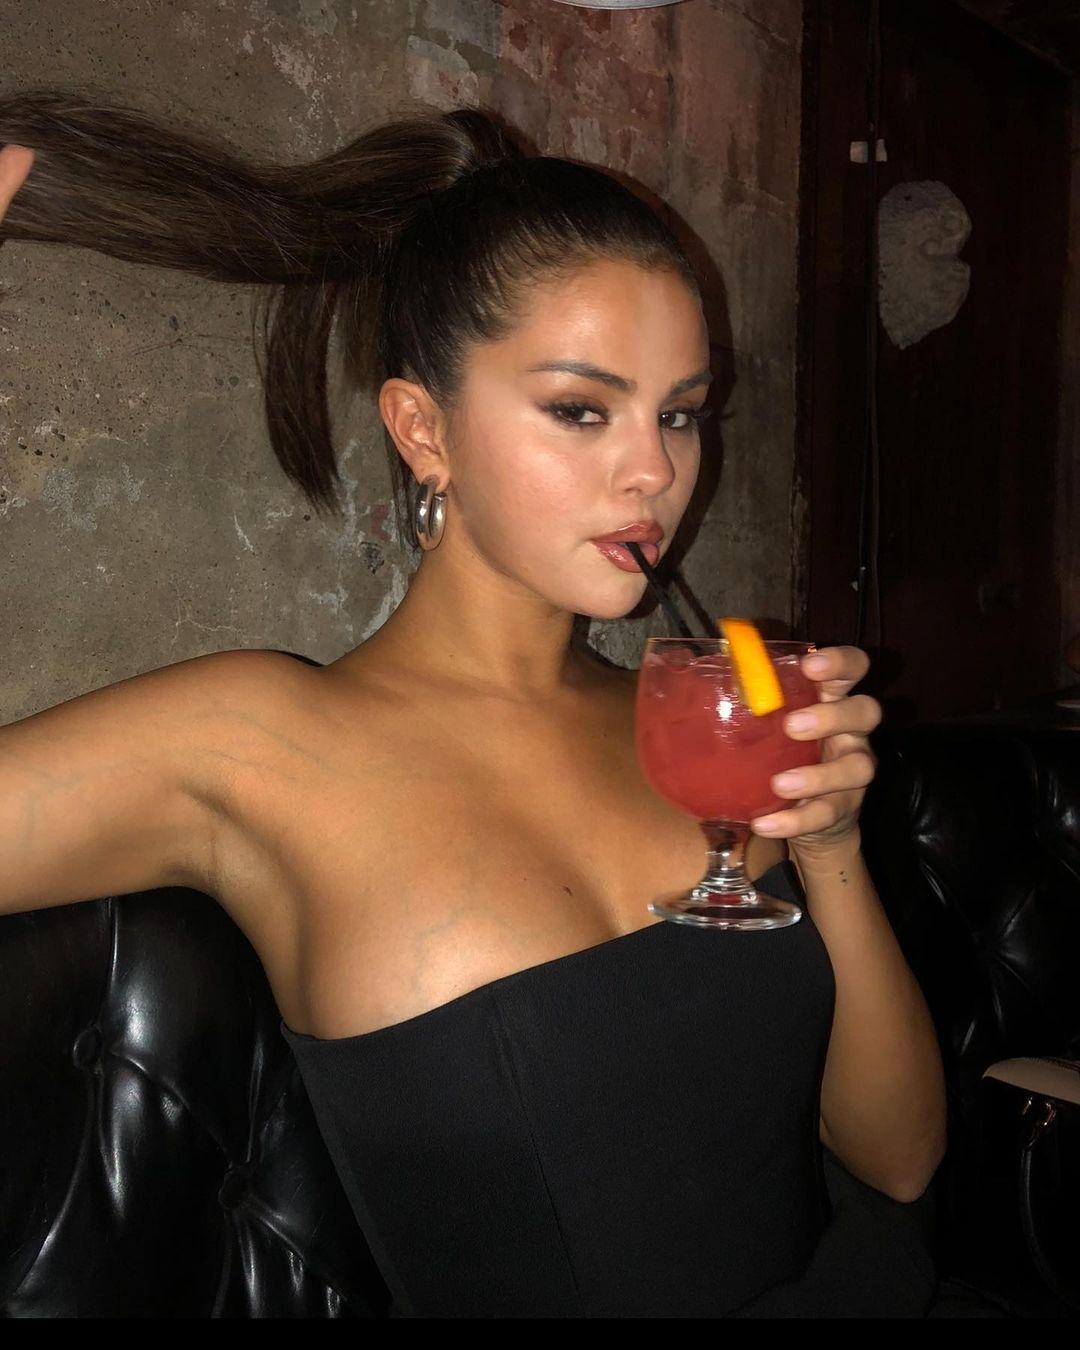 Selena Gomez puts on a VERY busty display wearing a low-cut top in new  TikTok